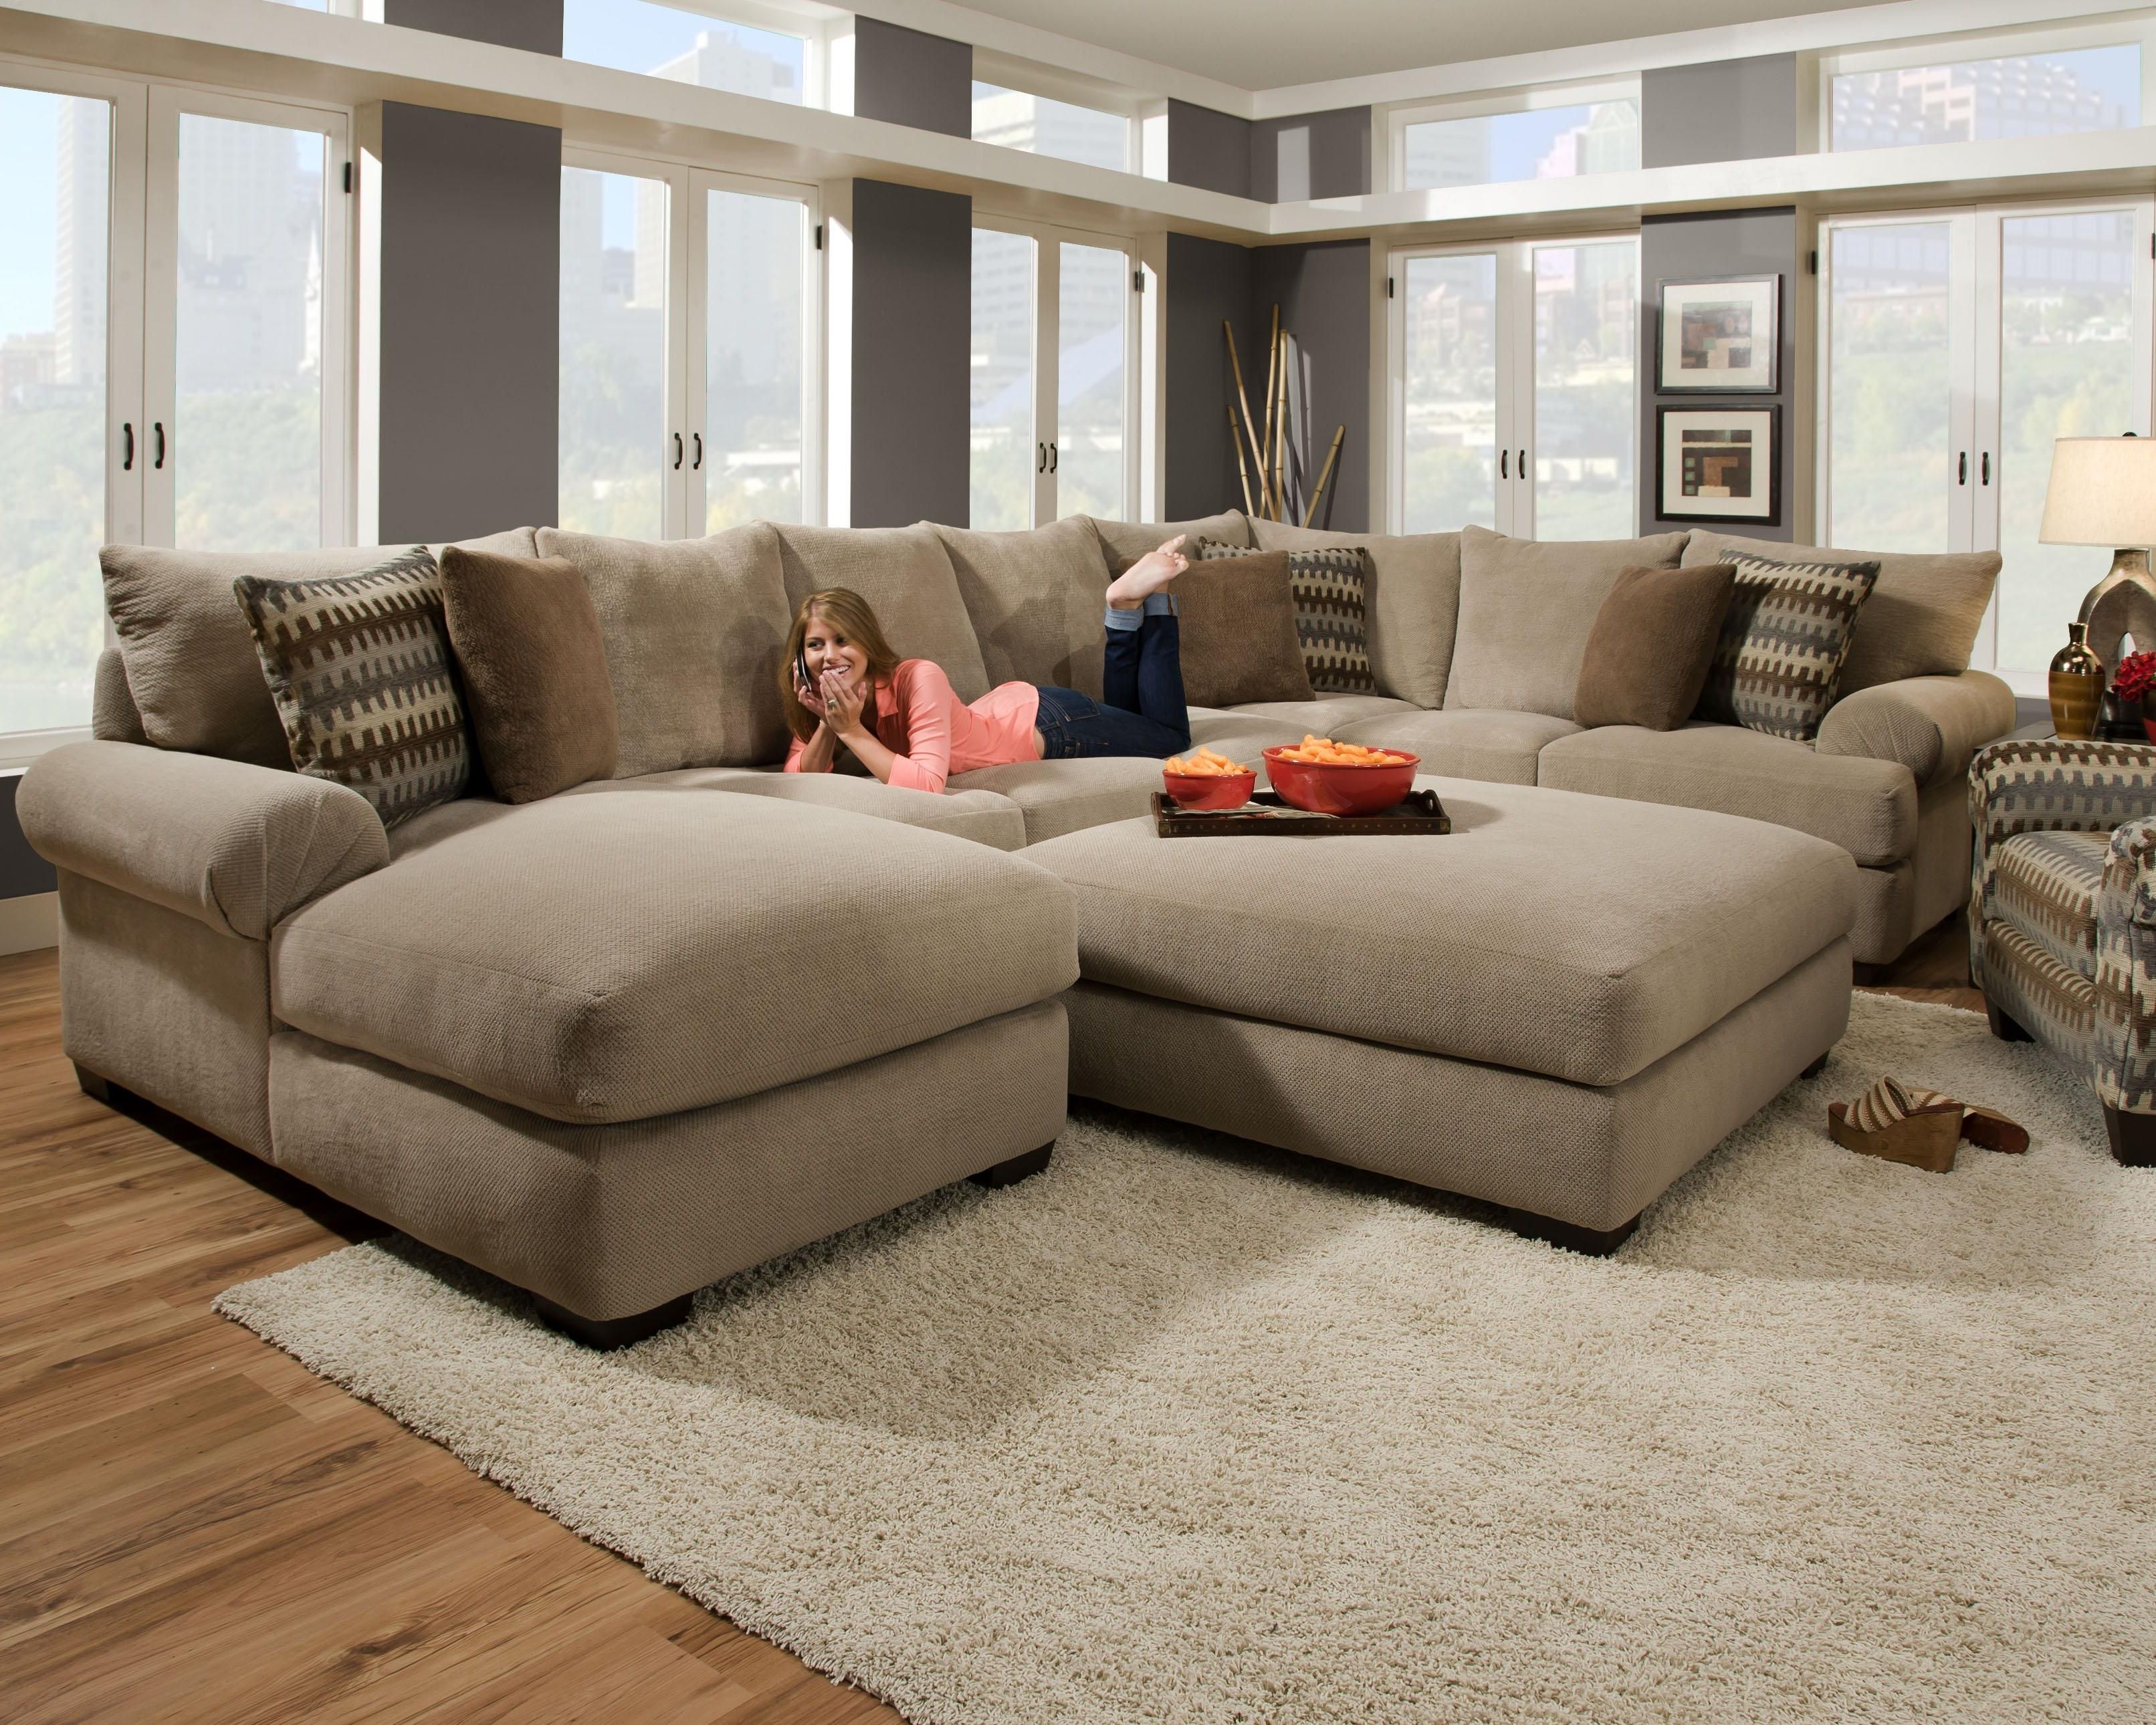 Trendy Sectional Sofas In North Carolina With Corinthian 61a0 Sectional Sofa With Right Side Chaise (View 5 of 20)